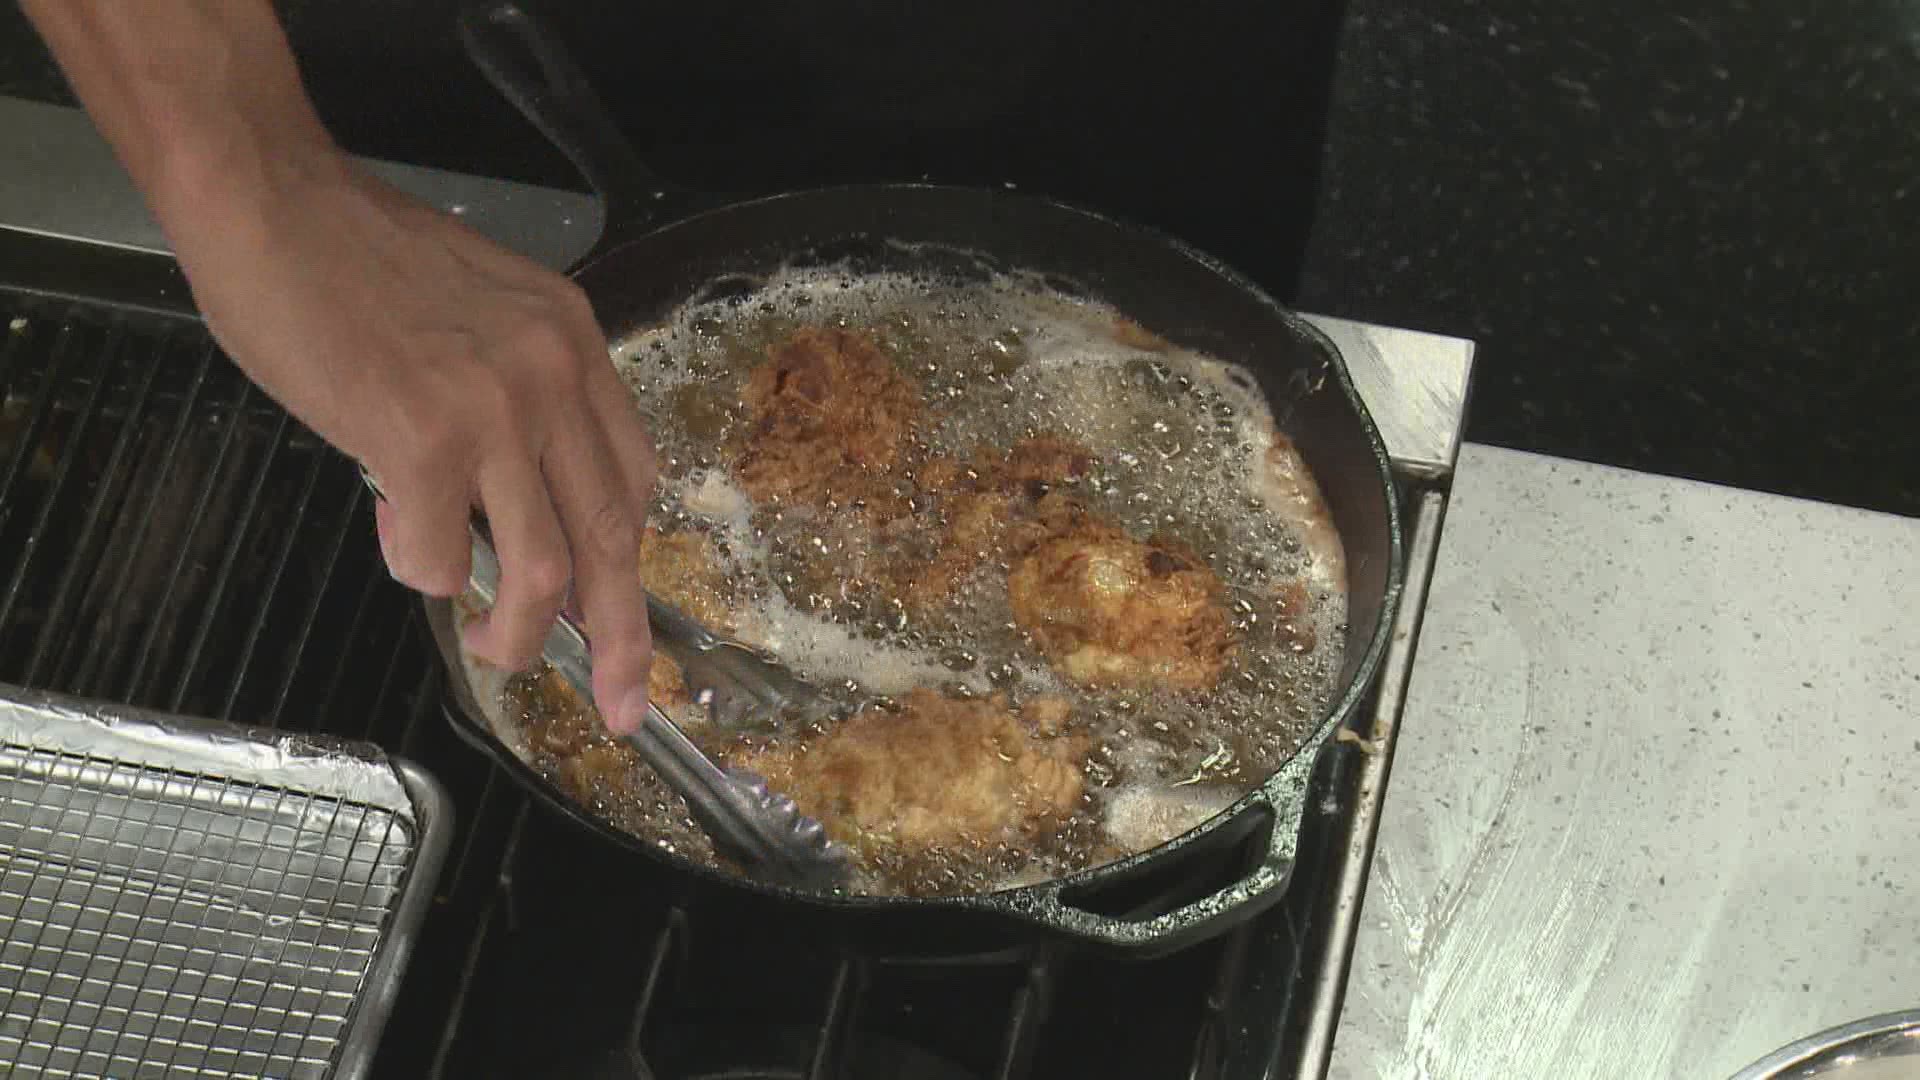 Chef Kevin Belton fries chicken and tops them with a sweet and savory sauce.